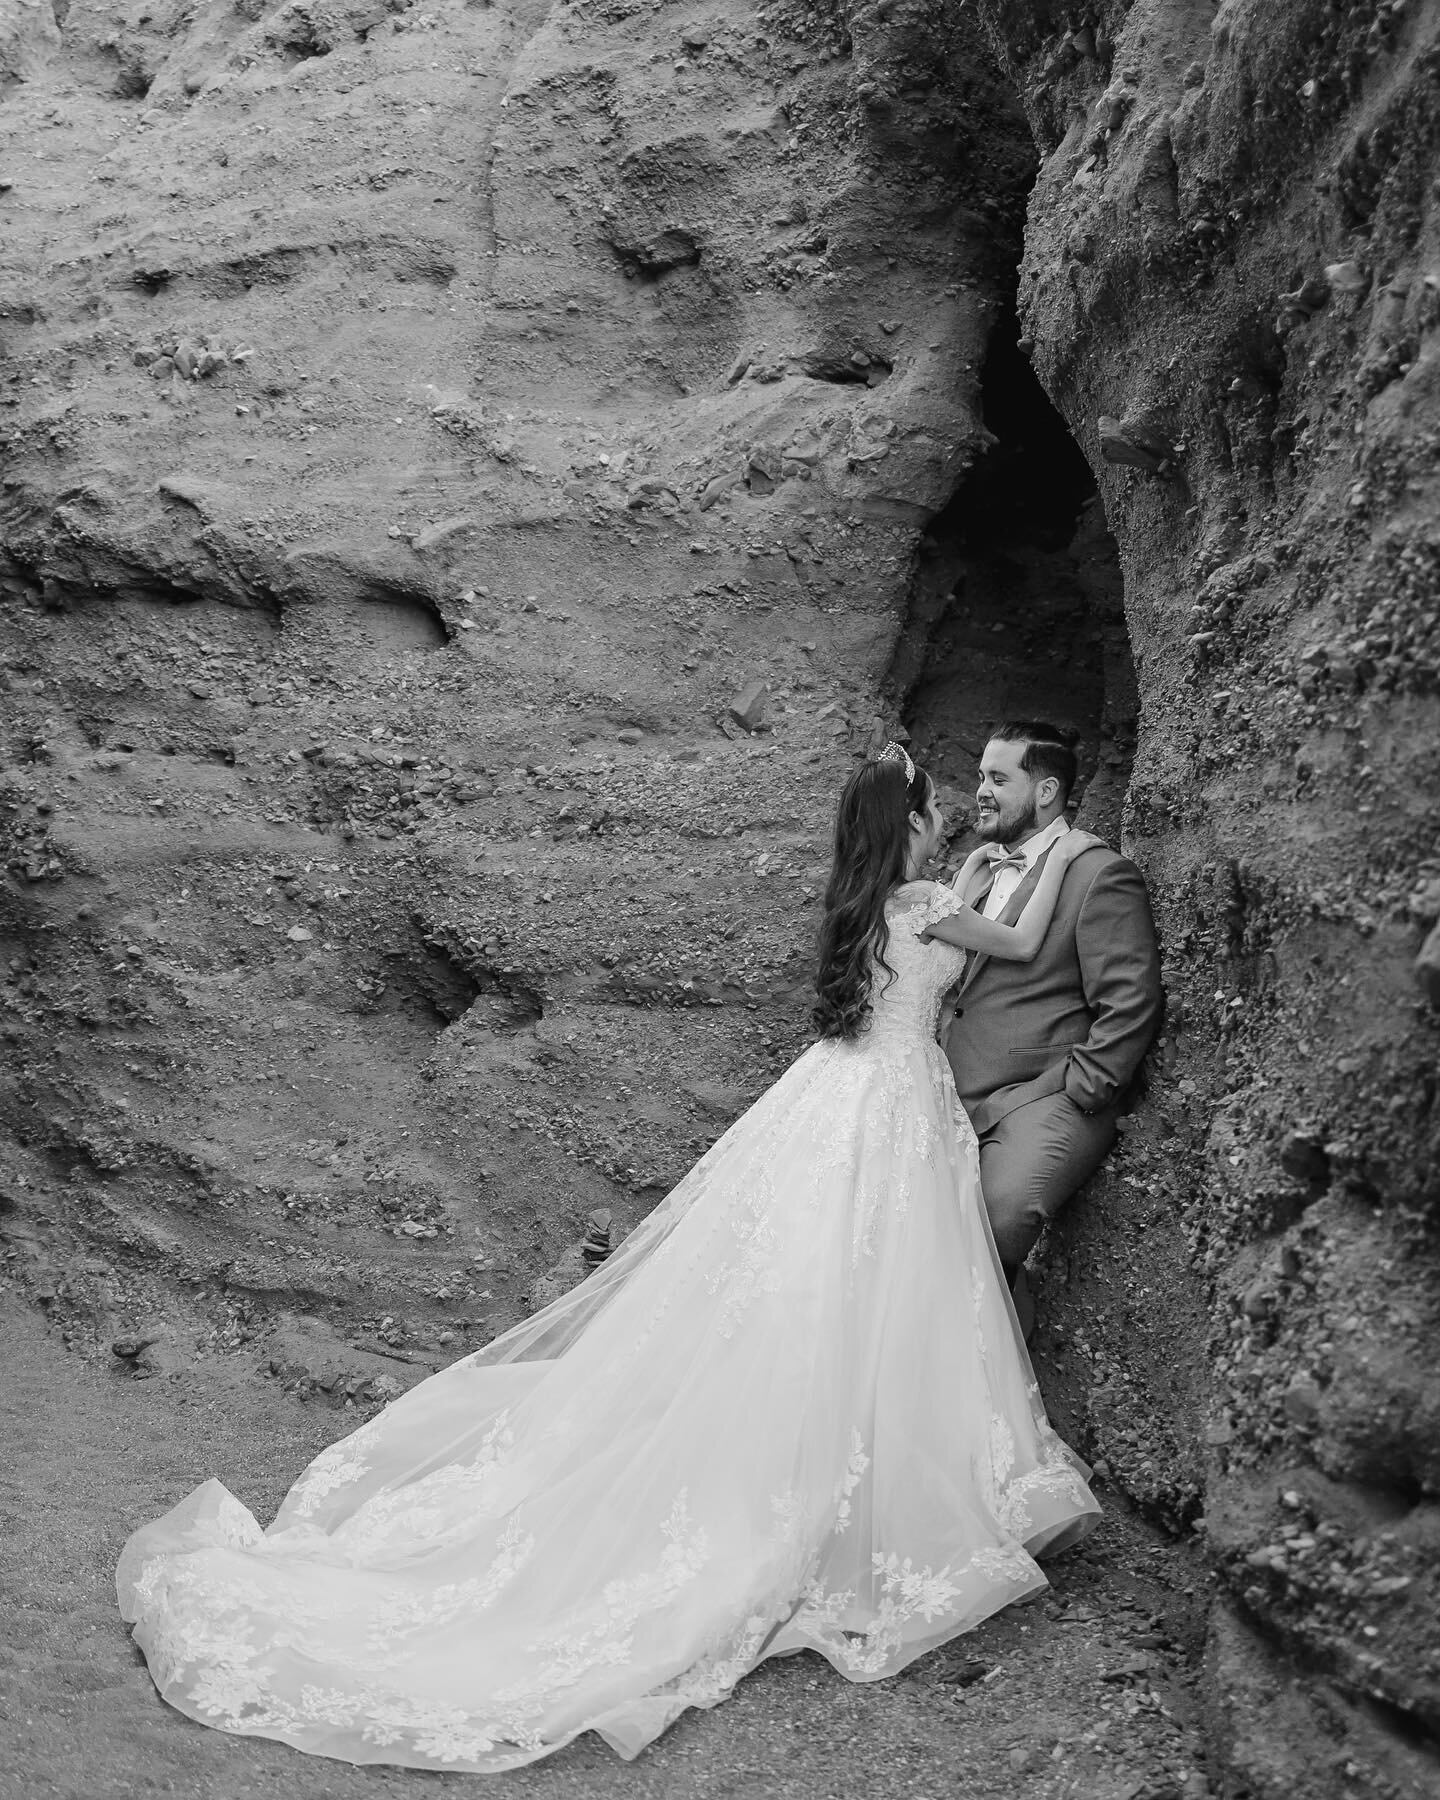 Anyone want to elope?

I&rsquo;m always down to travel and capture your special day! 

Now for my fellow photographers&hellip; imposter syndrome is hitting hard today. Suggestions on getting out of it? 😬

#wedding #weddingphotography #elpasoweddings